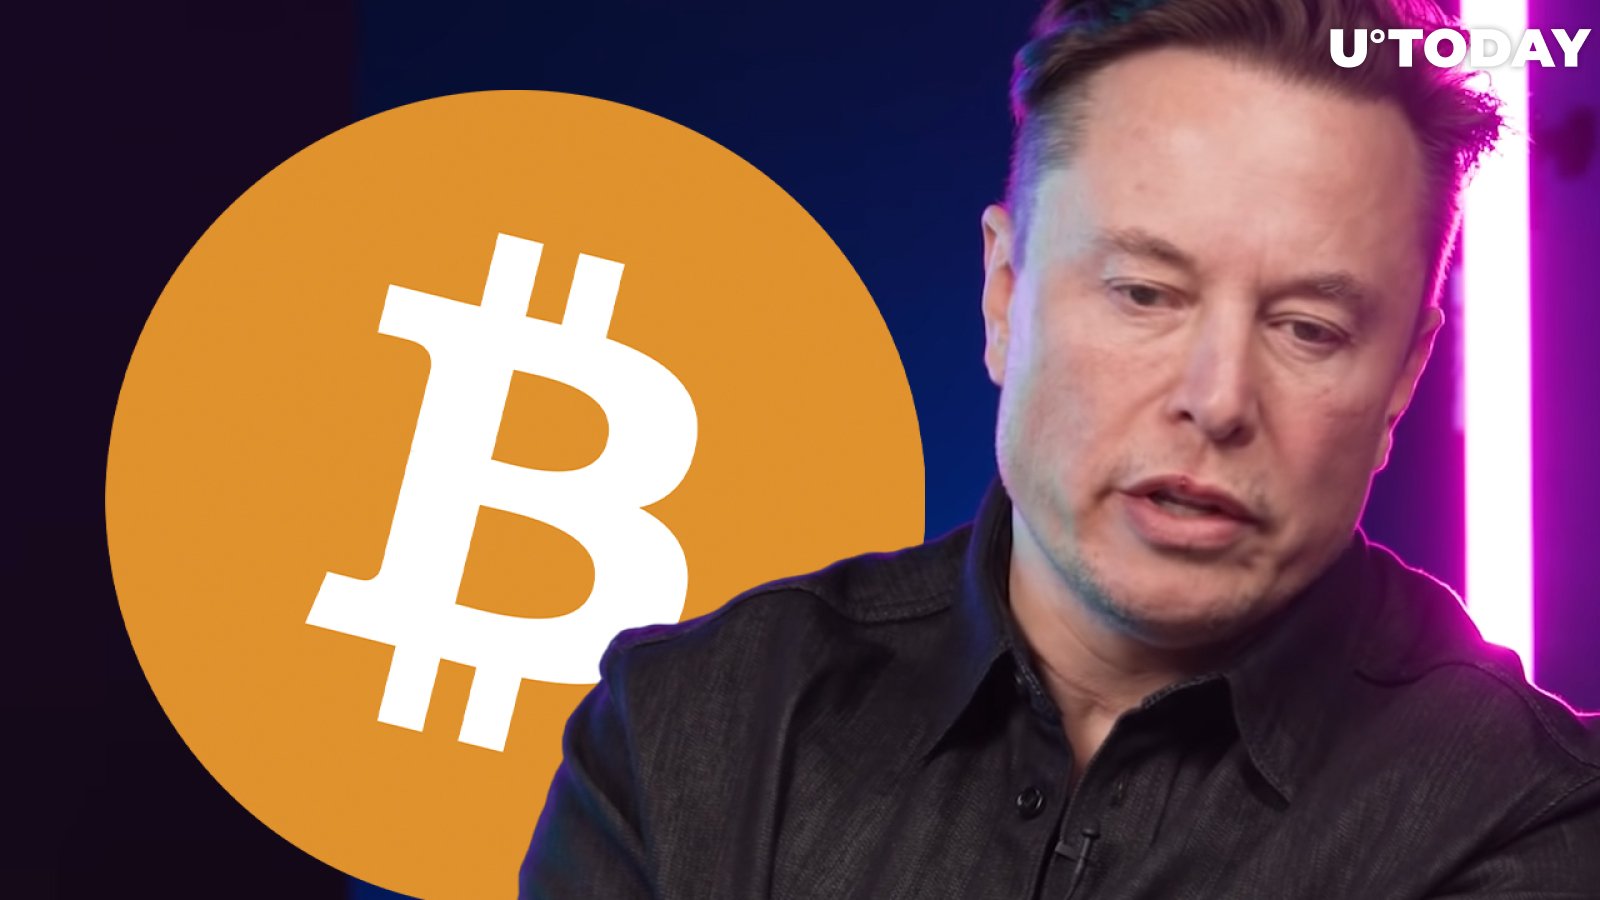 Former SpaceX Intern Continues to Insist That Elon Musk Created Bitcoin